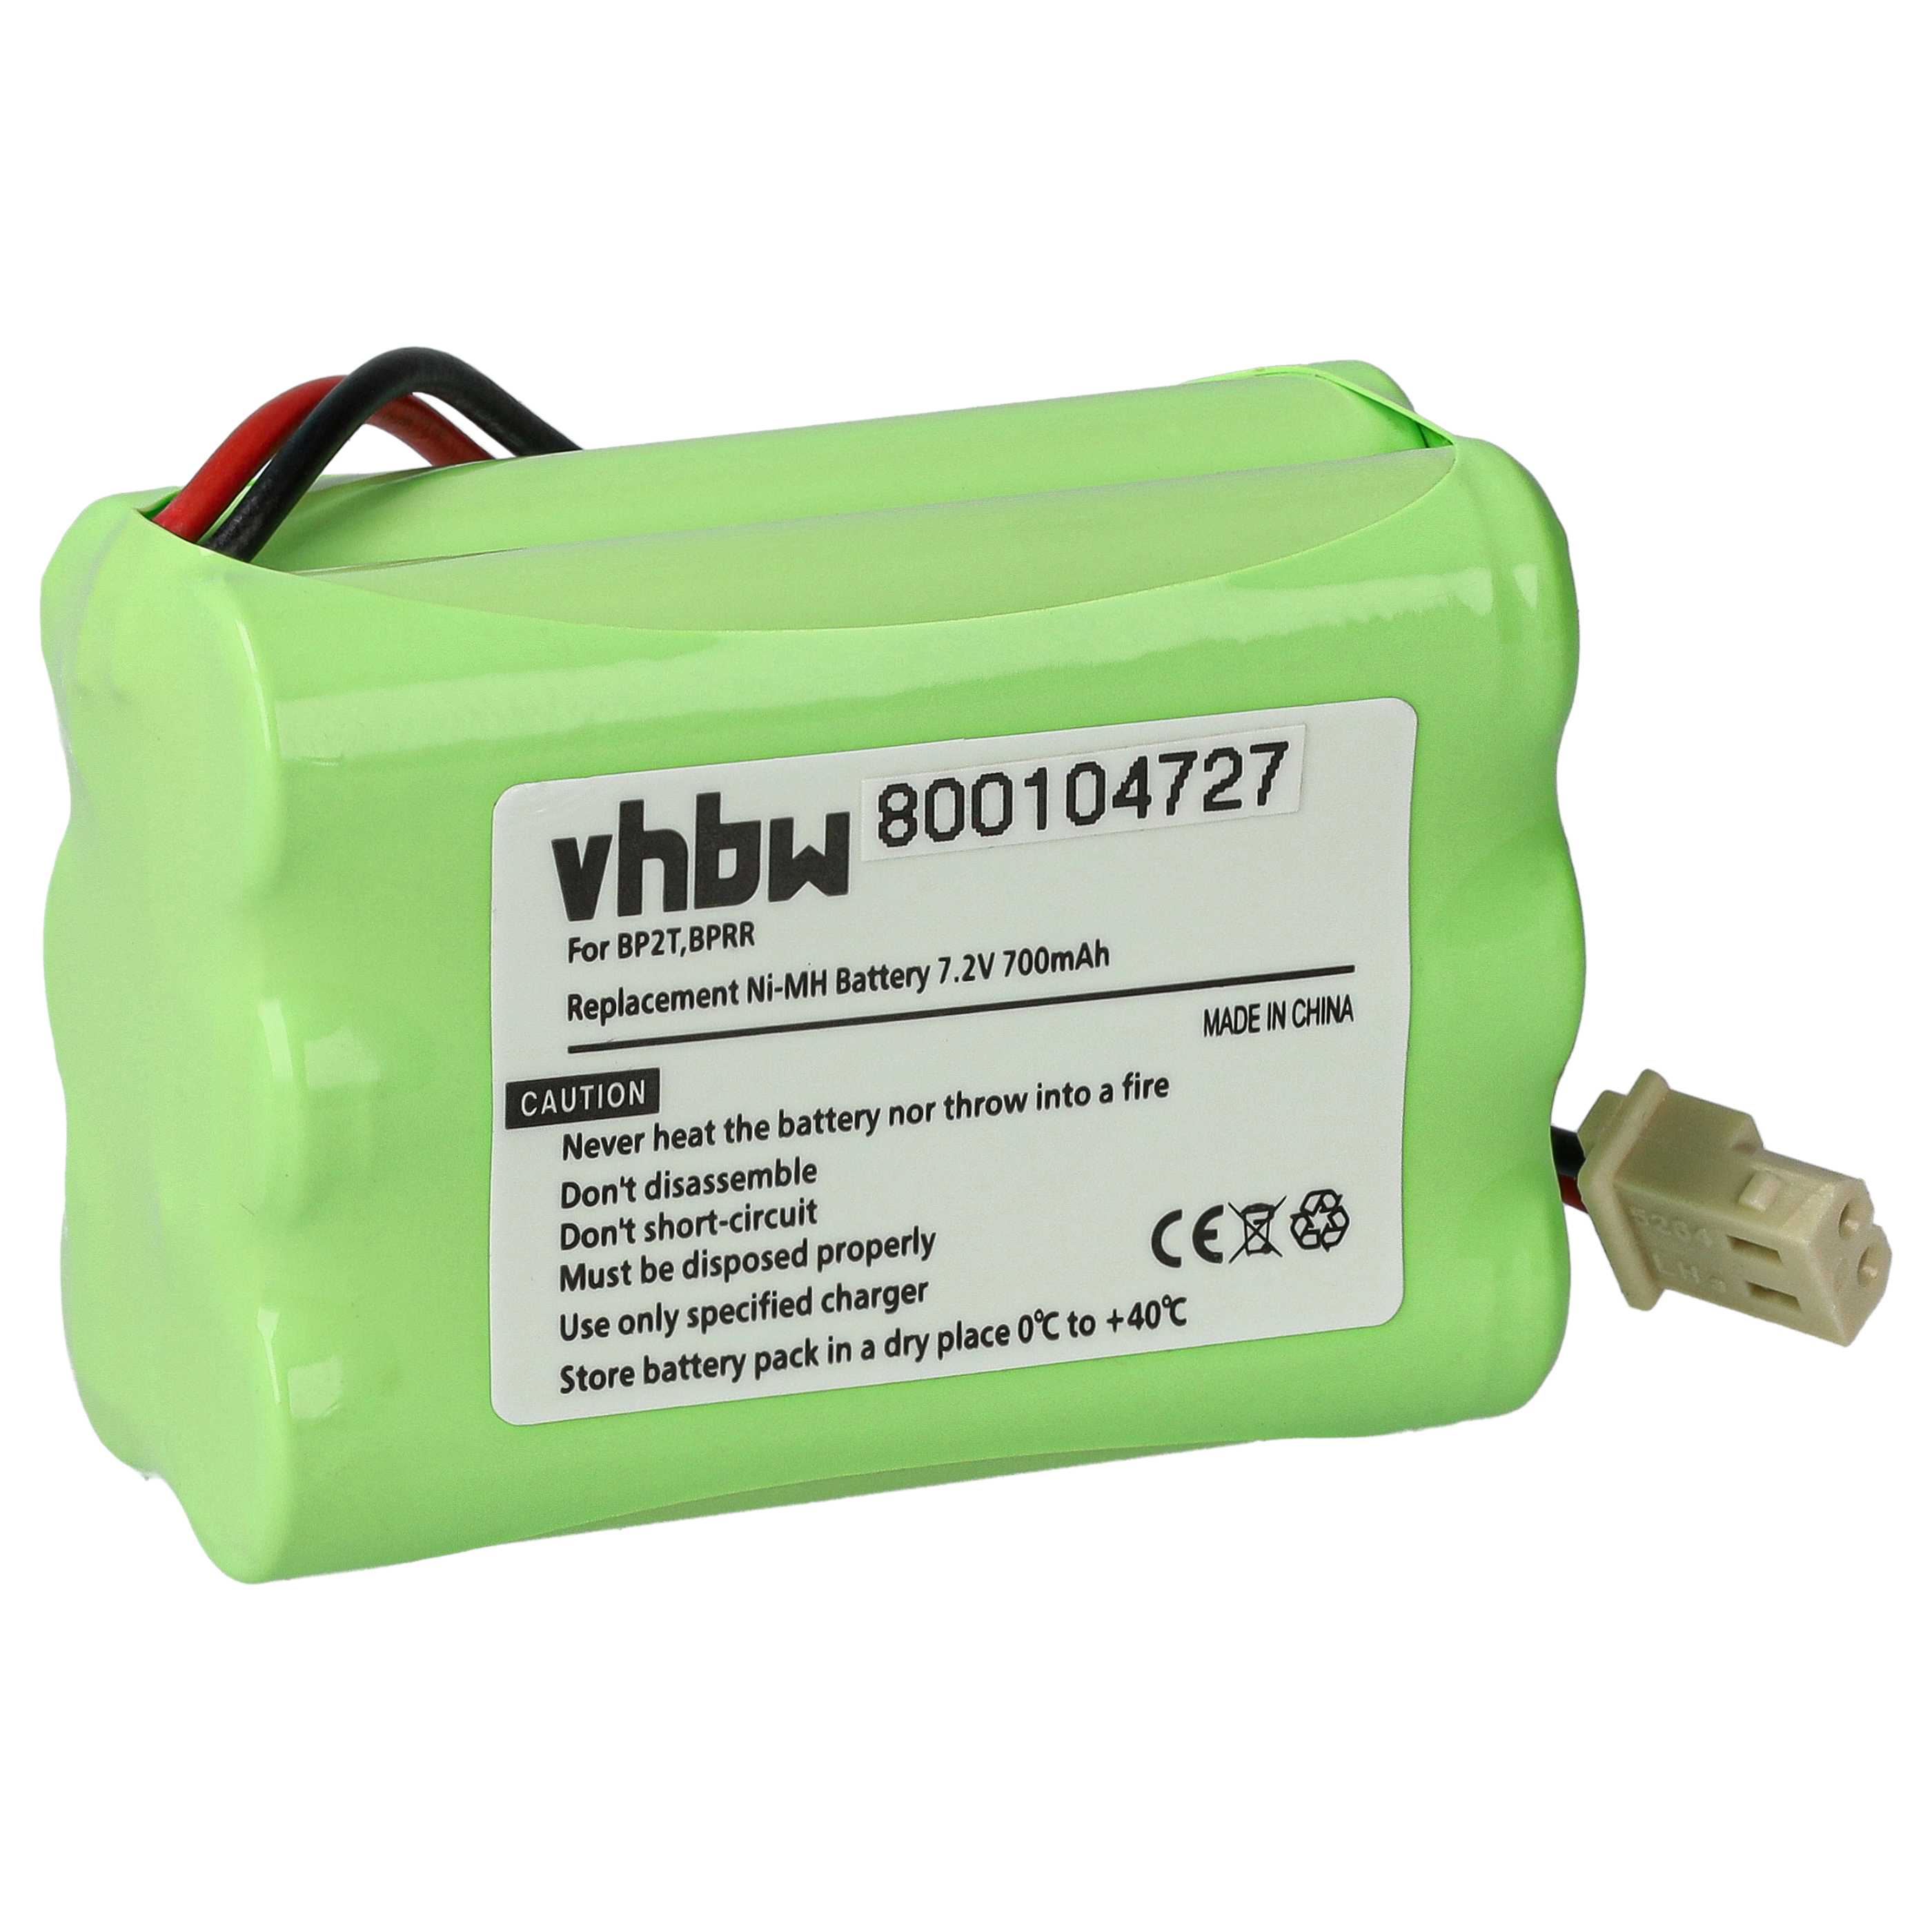 Dog Trainer Battery Replacement for Dogtra BP2T, BPRR - 700 mAh 7.2 V NiMH